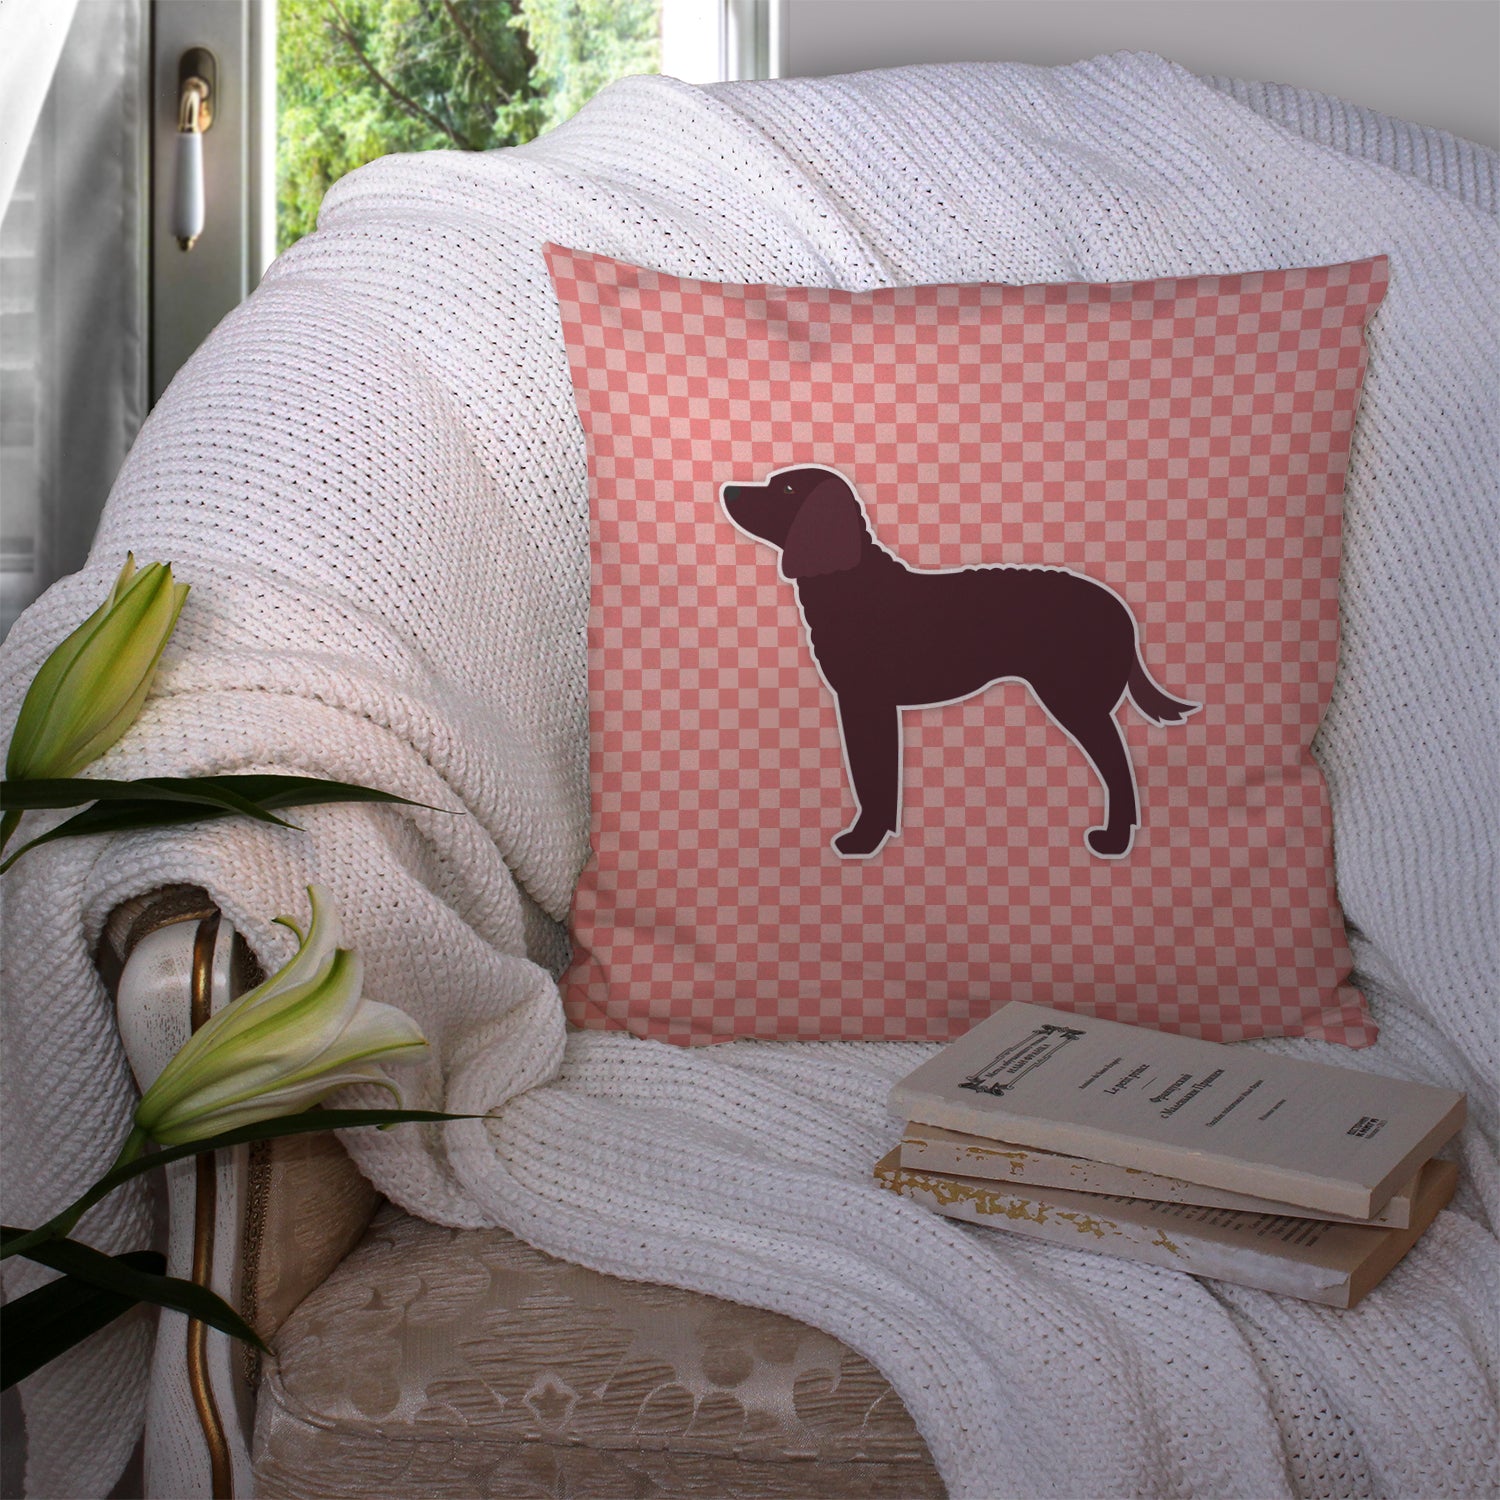 American Water Spaniel Checkerboard Pink Fabric Decorative Pillow BB3601PW1414 - the-store.com